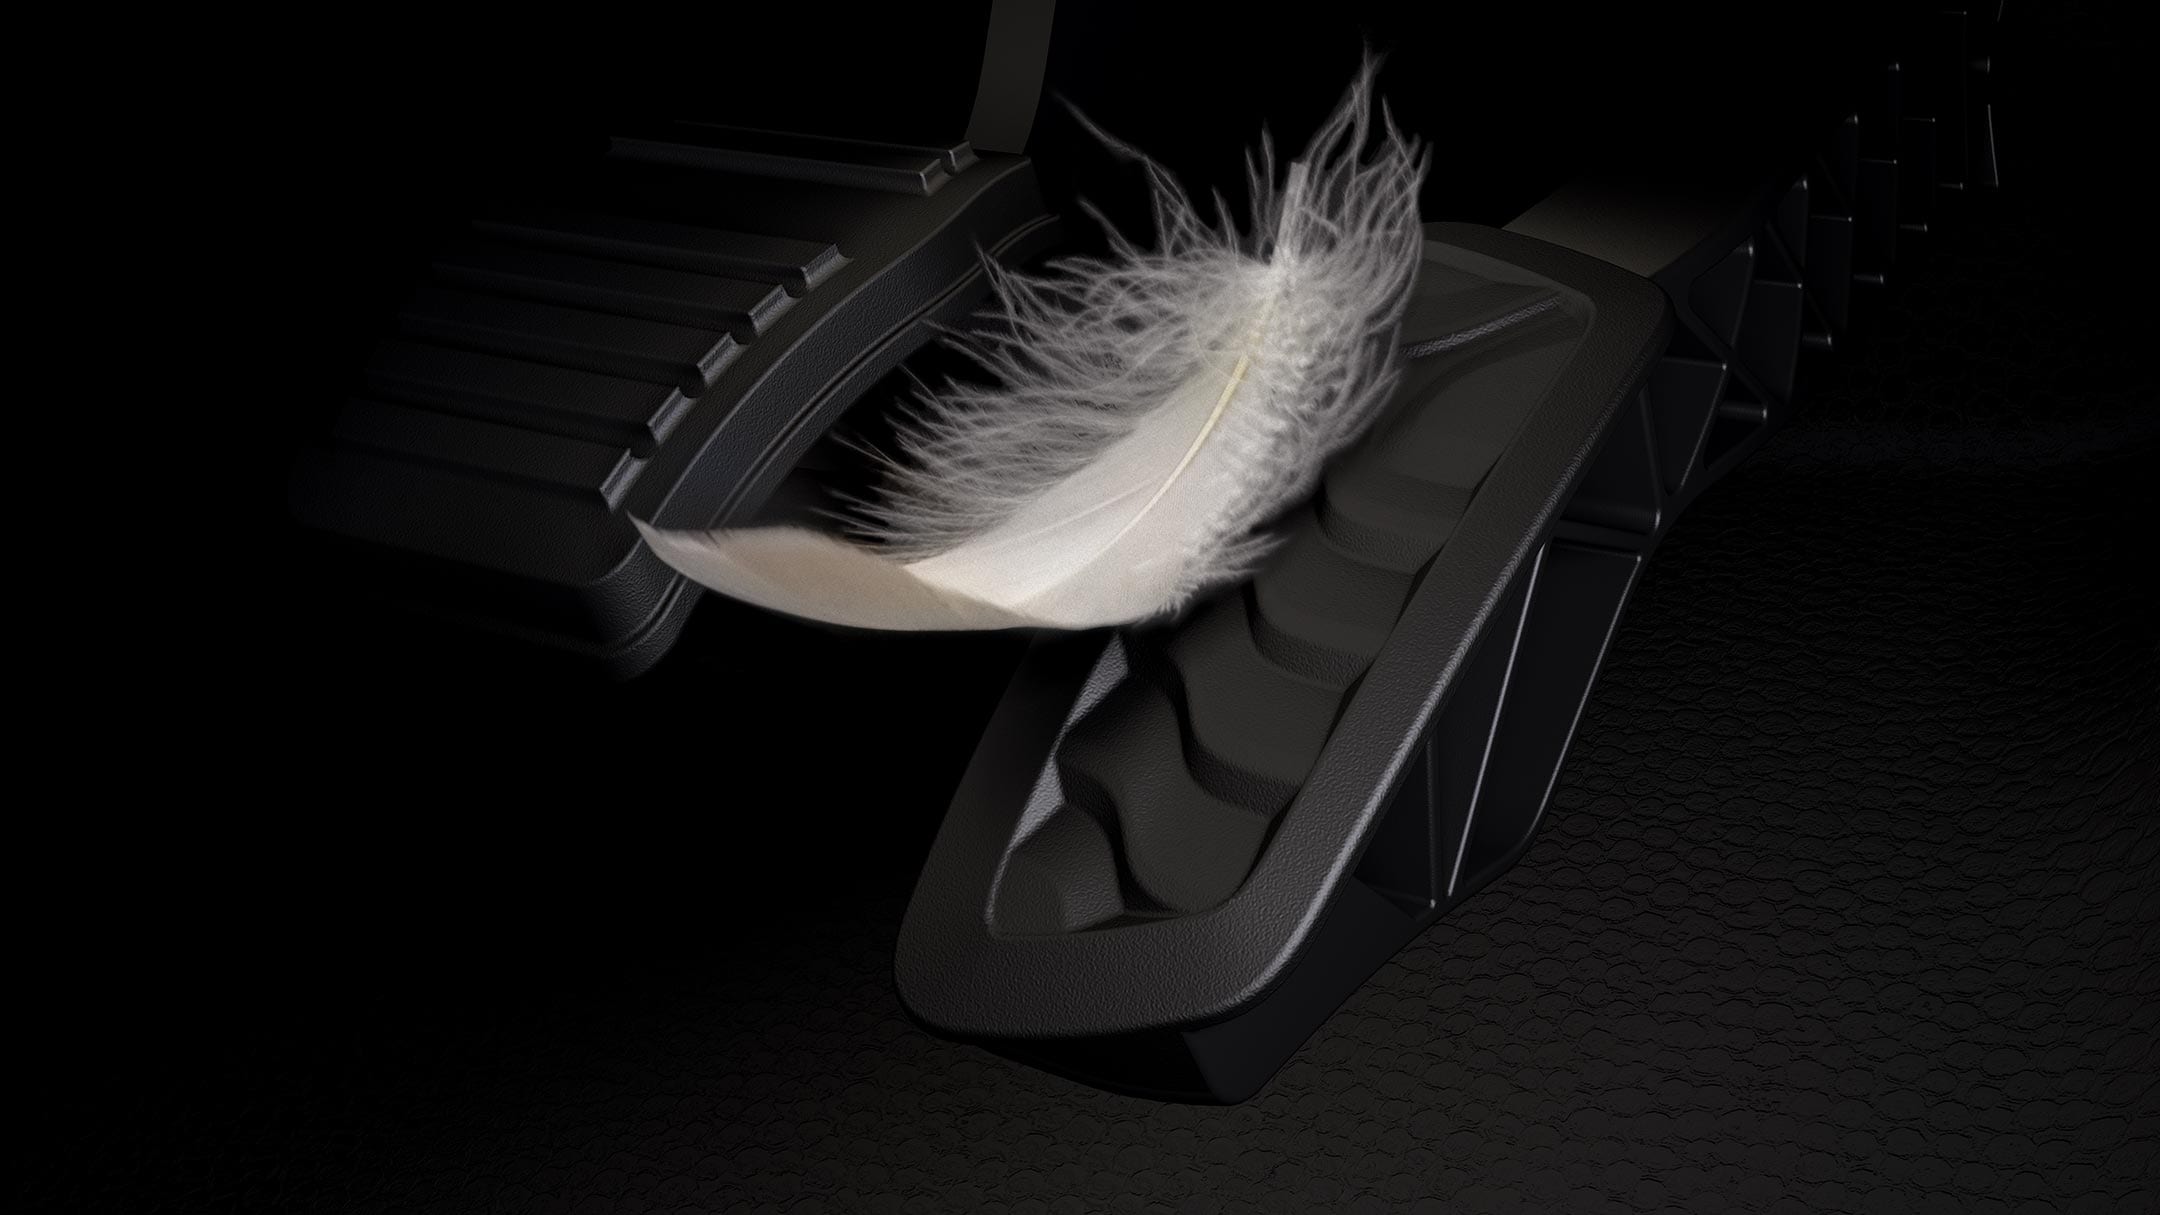 Interior of Ford Transit with feather on acceleration pedal